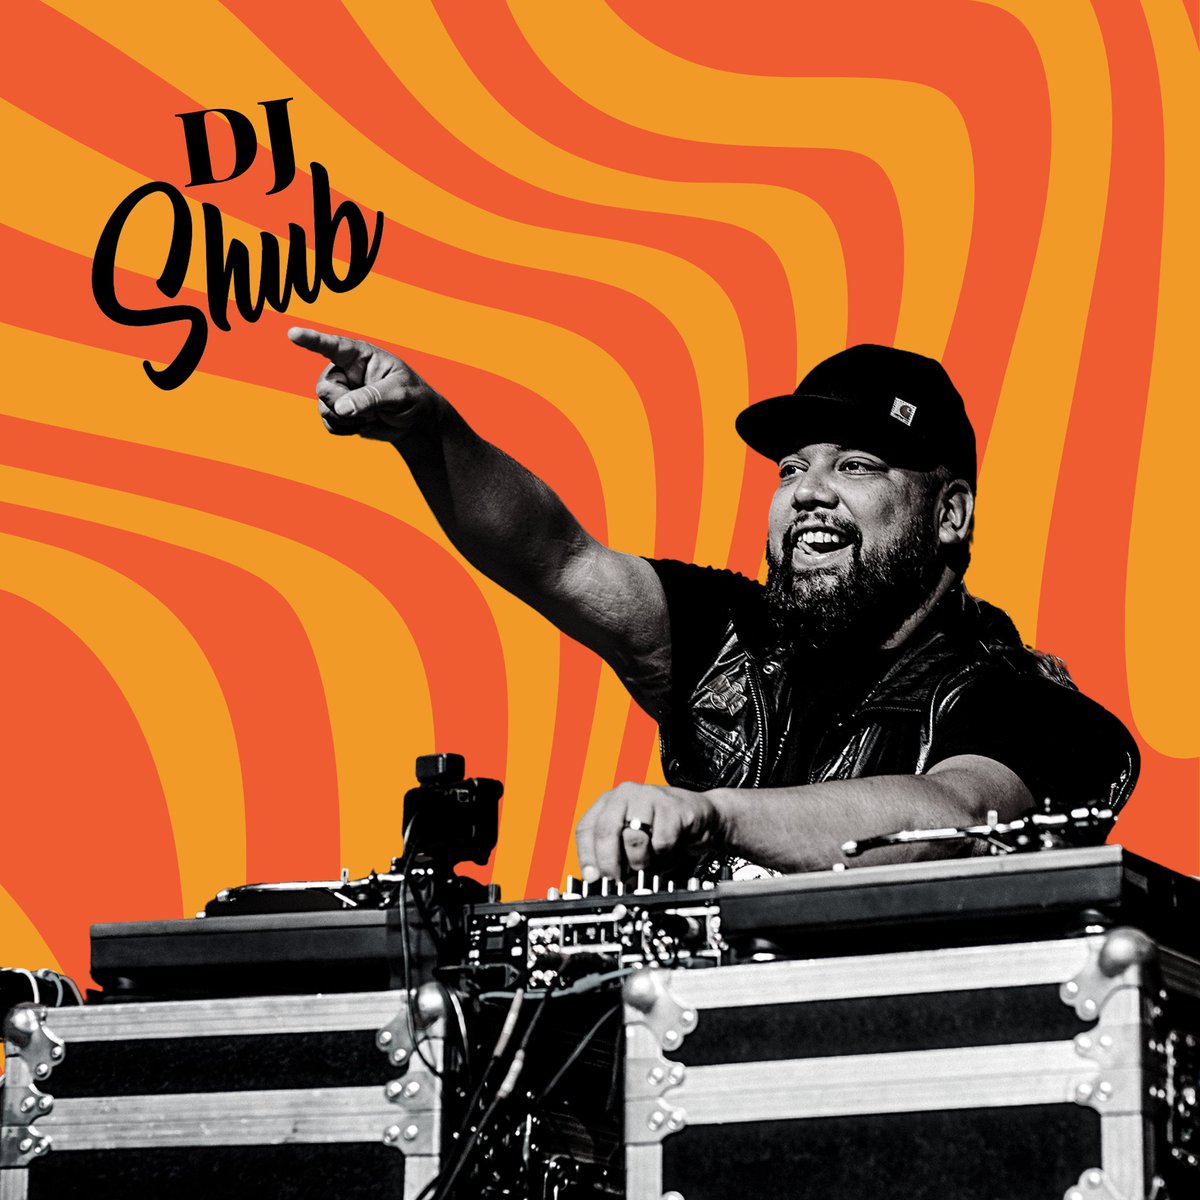 THIS SATURDAY @djshub performs in Kitchener at a free outdoor concert in support of @grhospitalkw. His JUNO award-winning #PowWowStep beats blend traditional Indigenous music with #Dubstep & other electronic sounds. 🔥
Free tickets & info:
kdub.ca/event/rally-fo…
#kdub